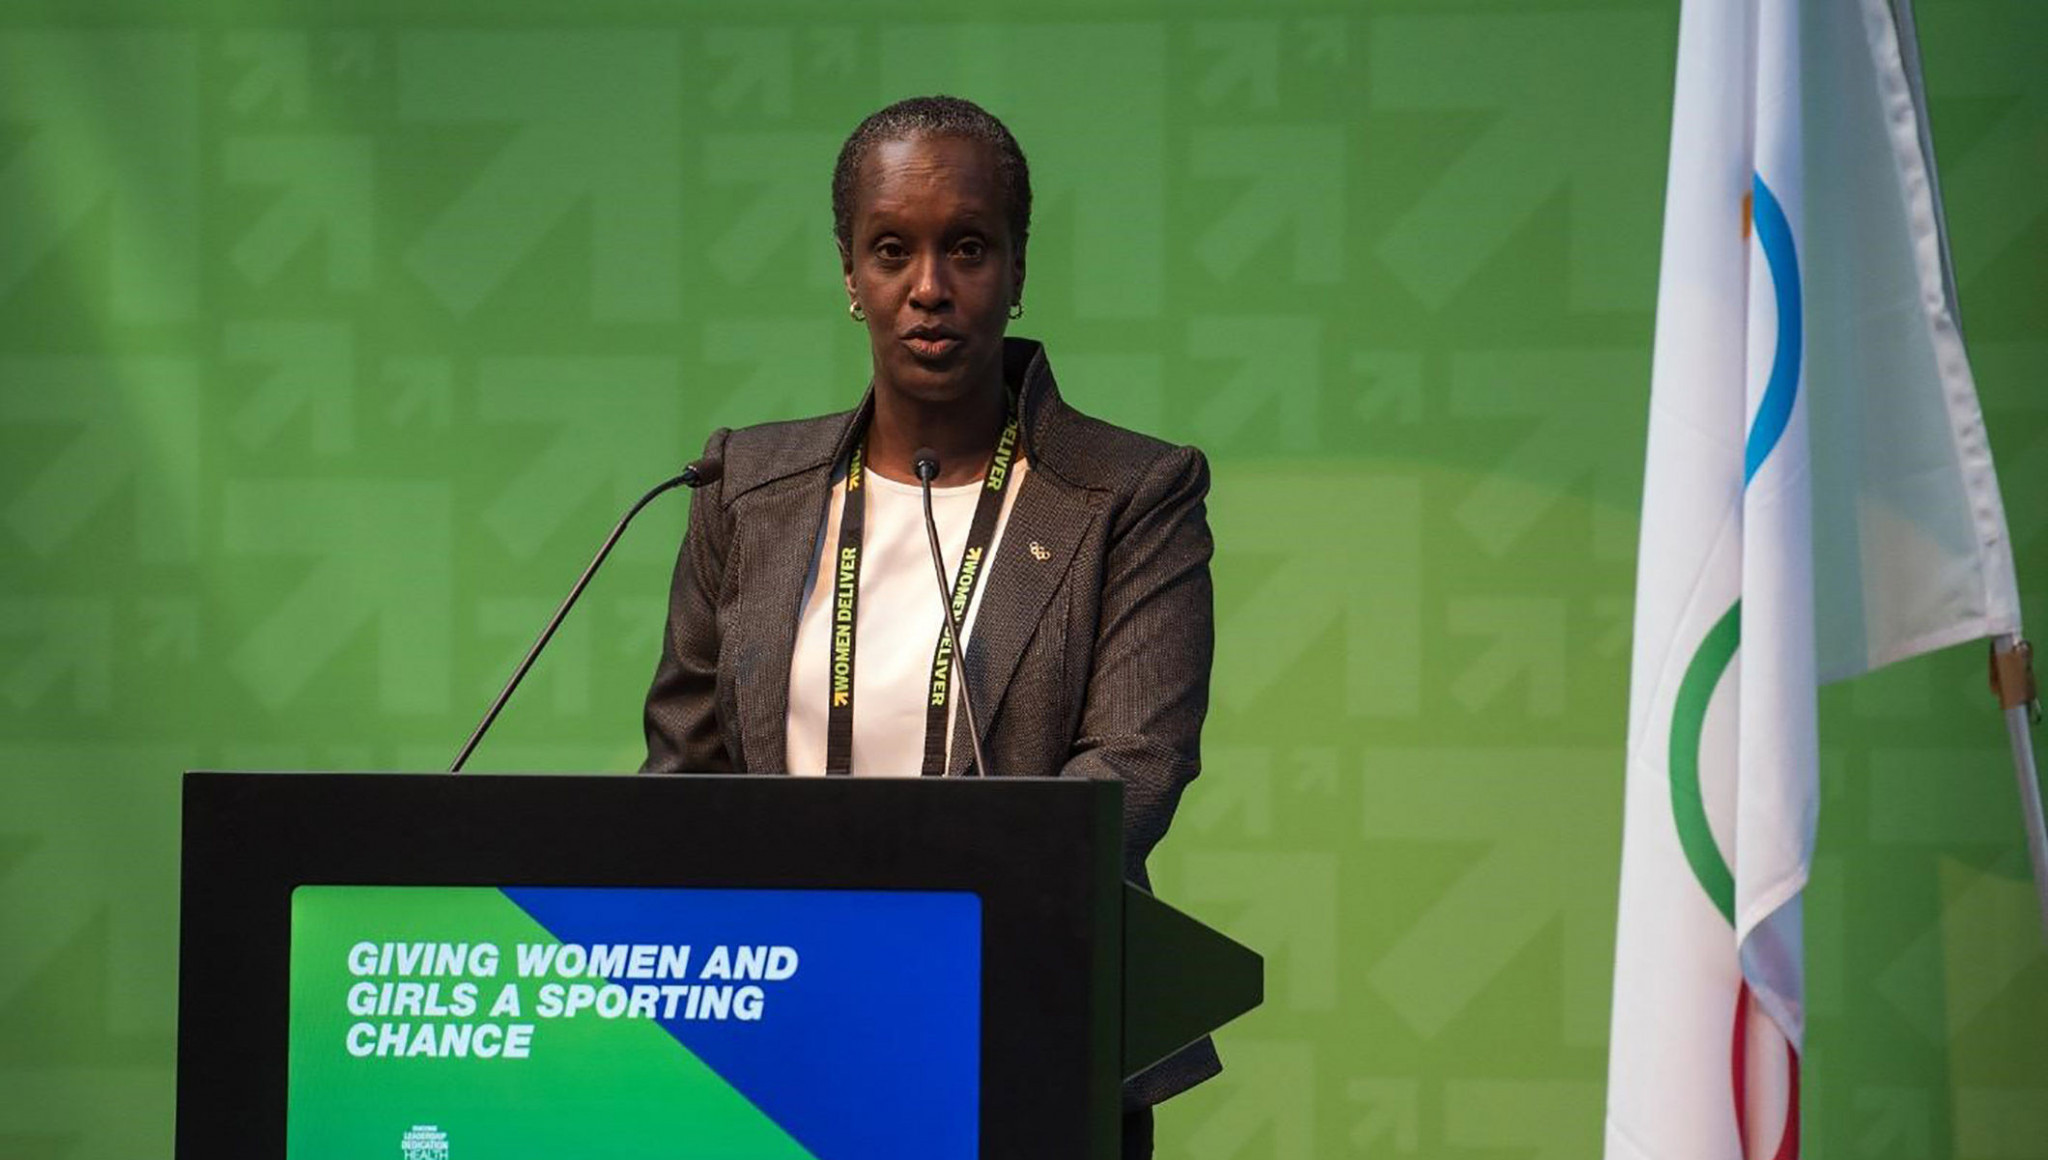 Nsekera calls for more work towards gender equality before IWG World Conference in Sport